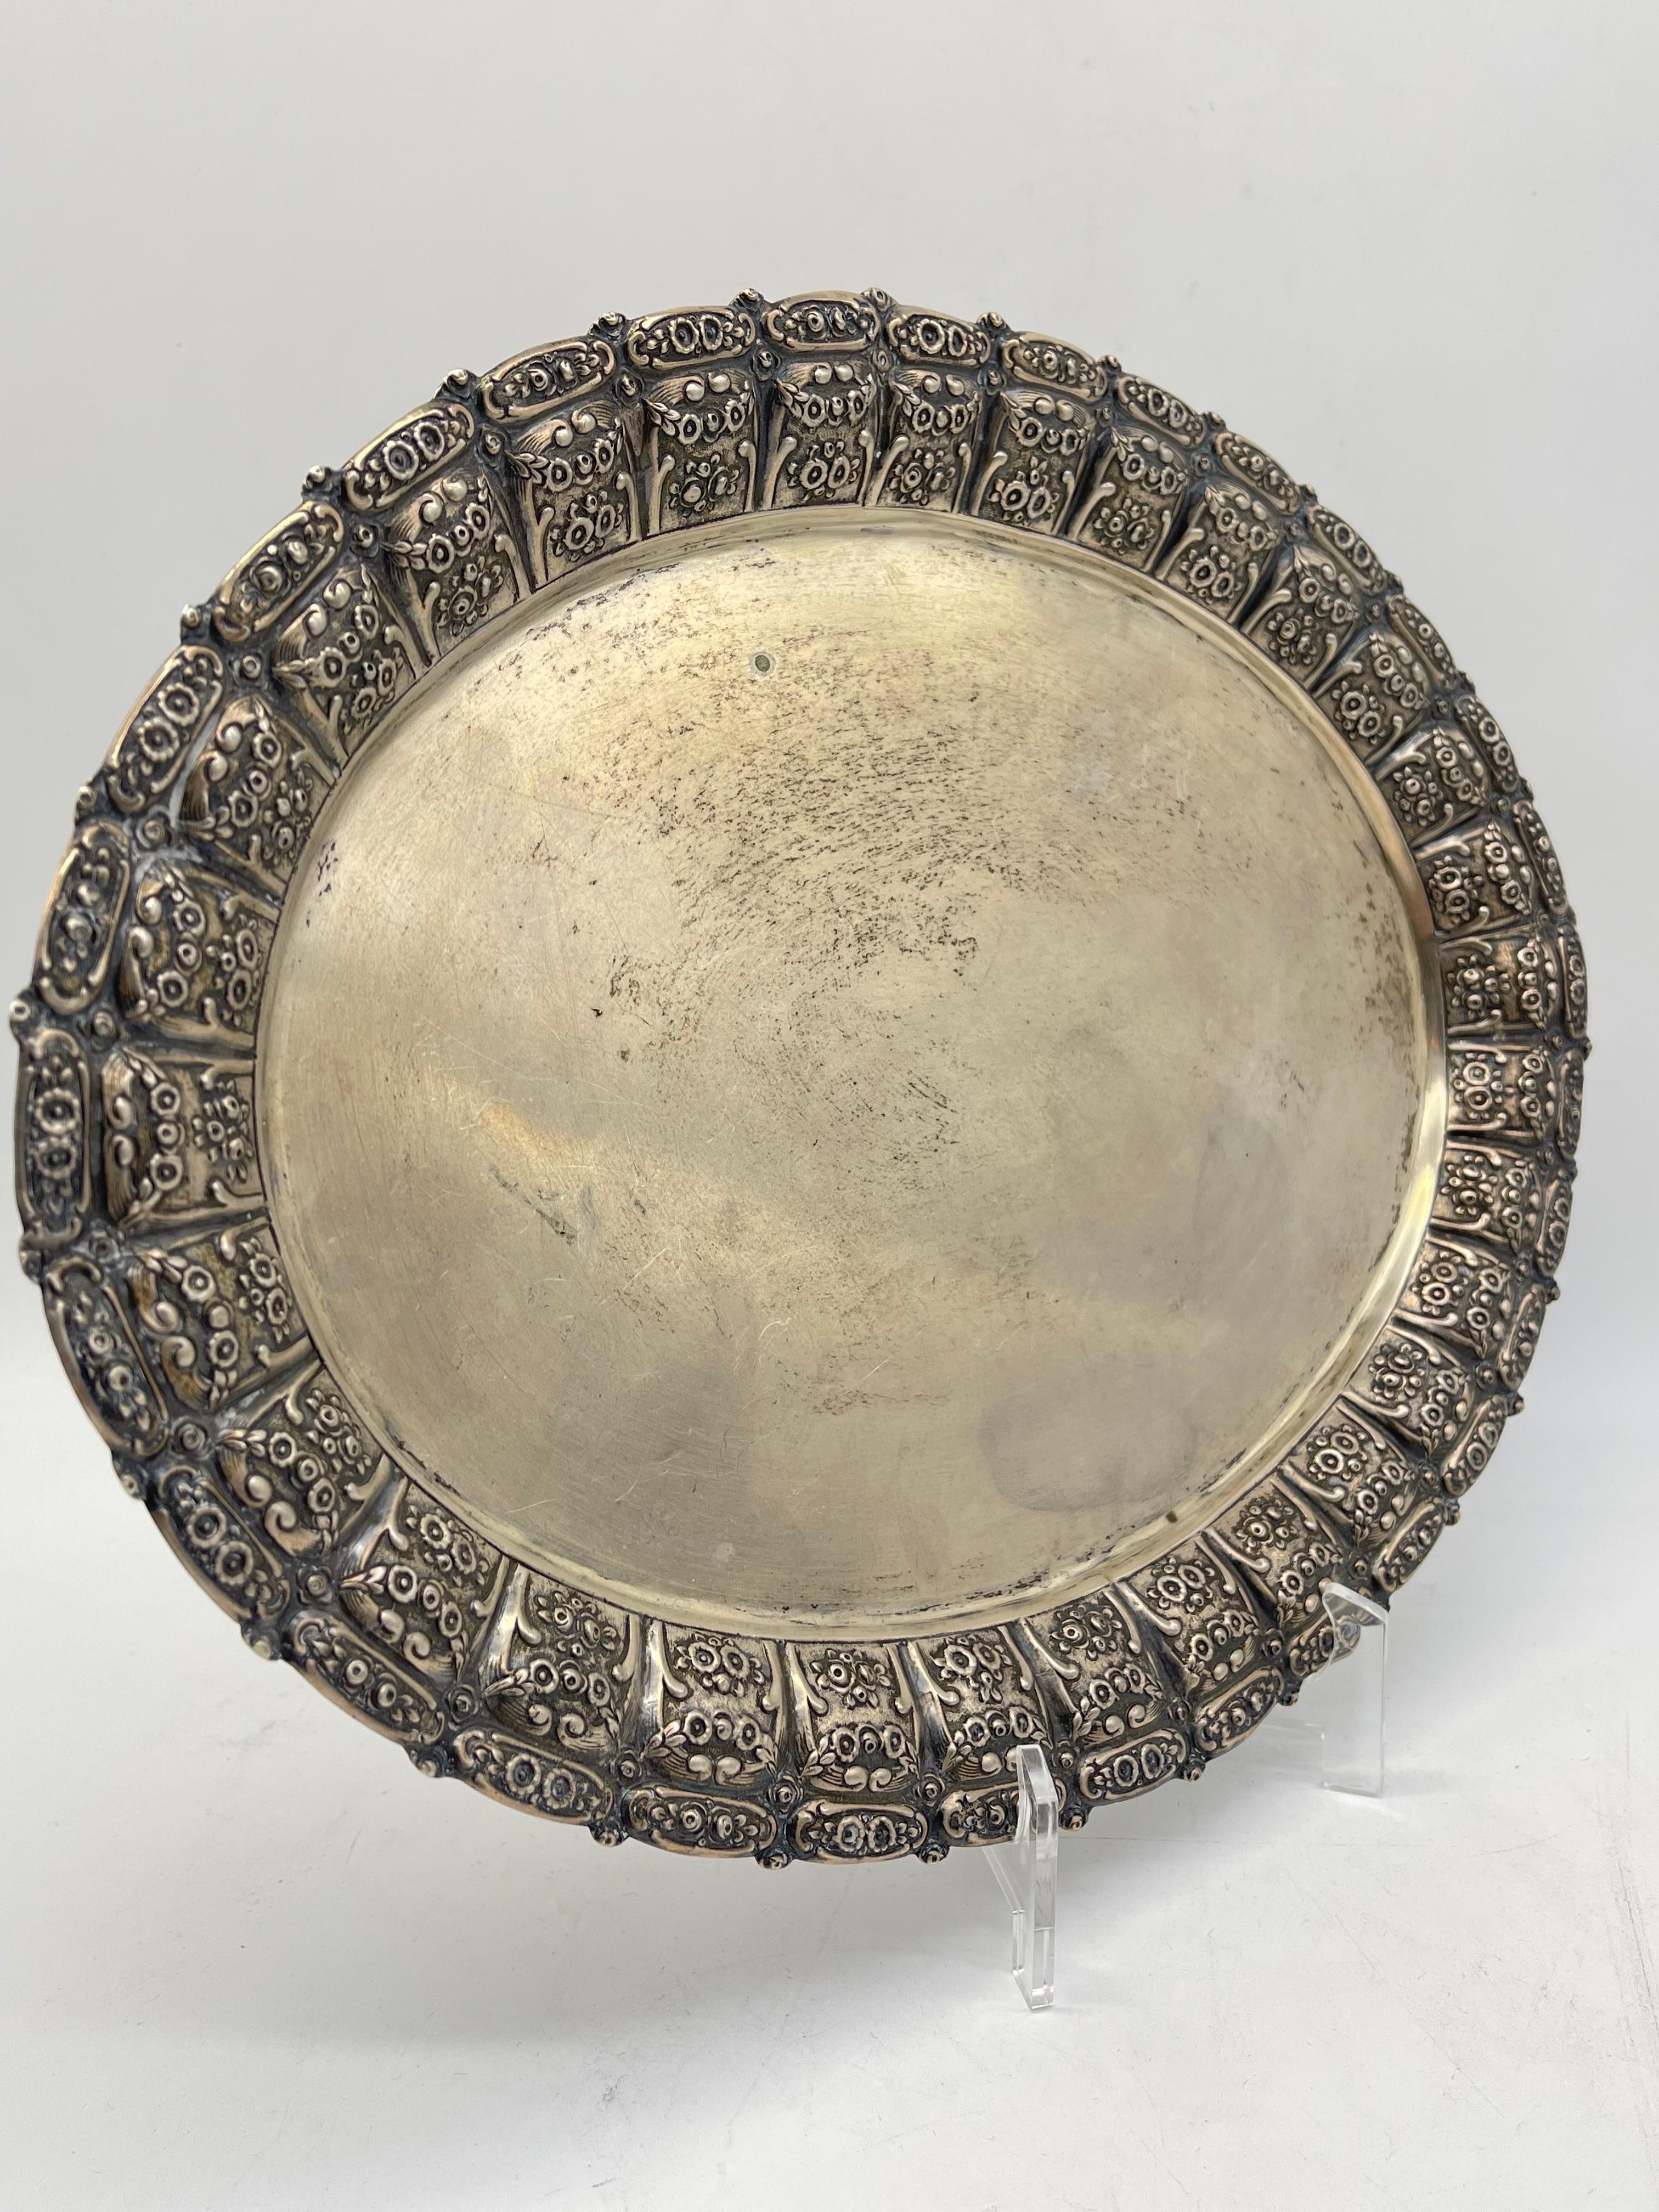 Silver tablet 830 with Roses ornament

Half moon & crown - Germany

Weight: 388 grams

The condition can be seen in the pictures.